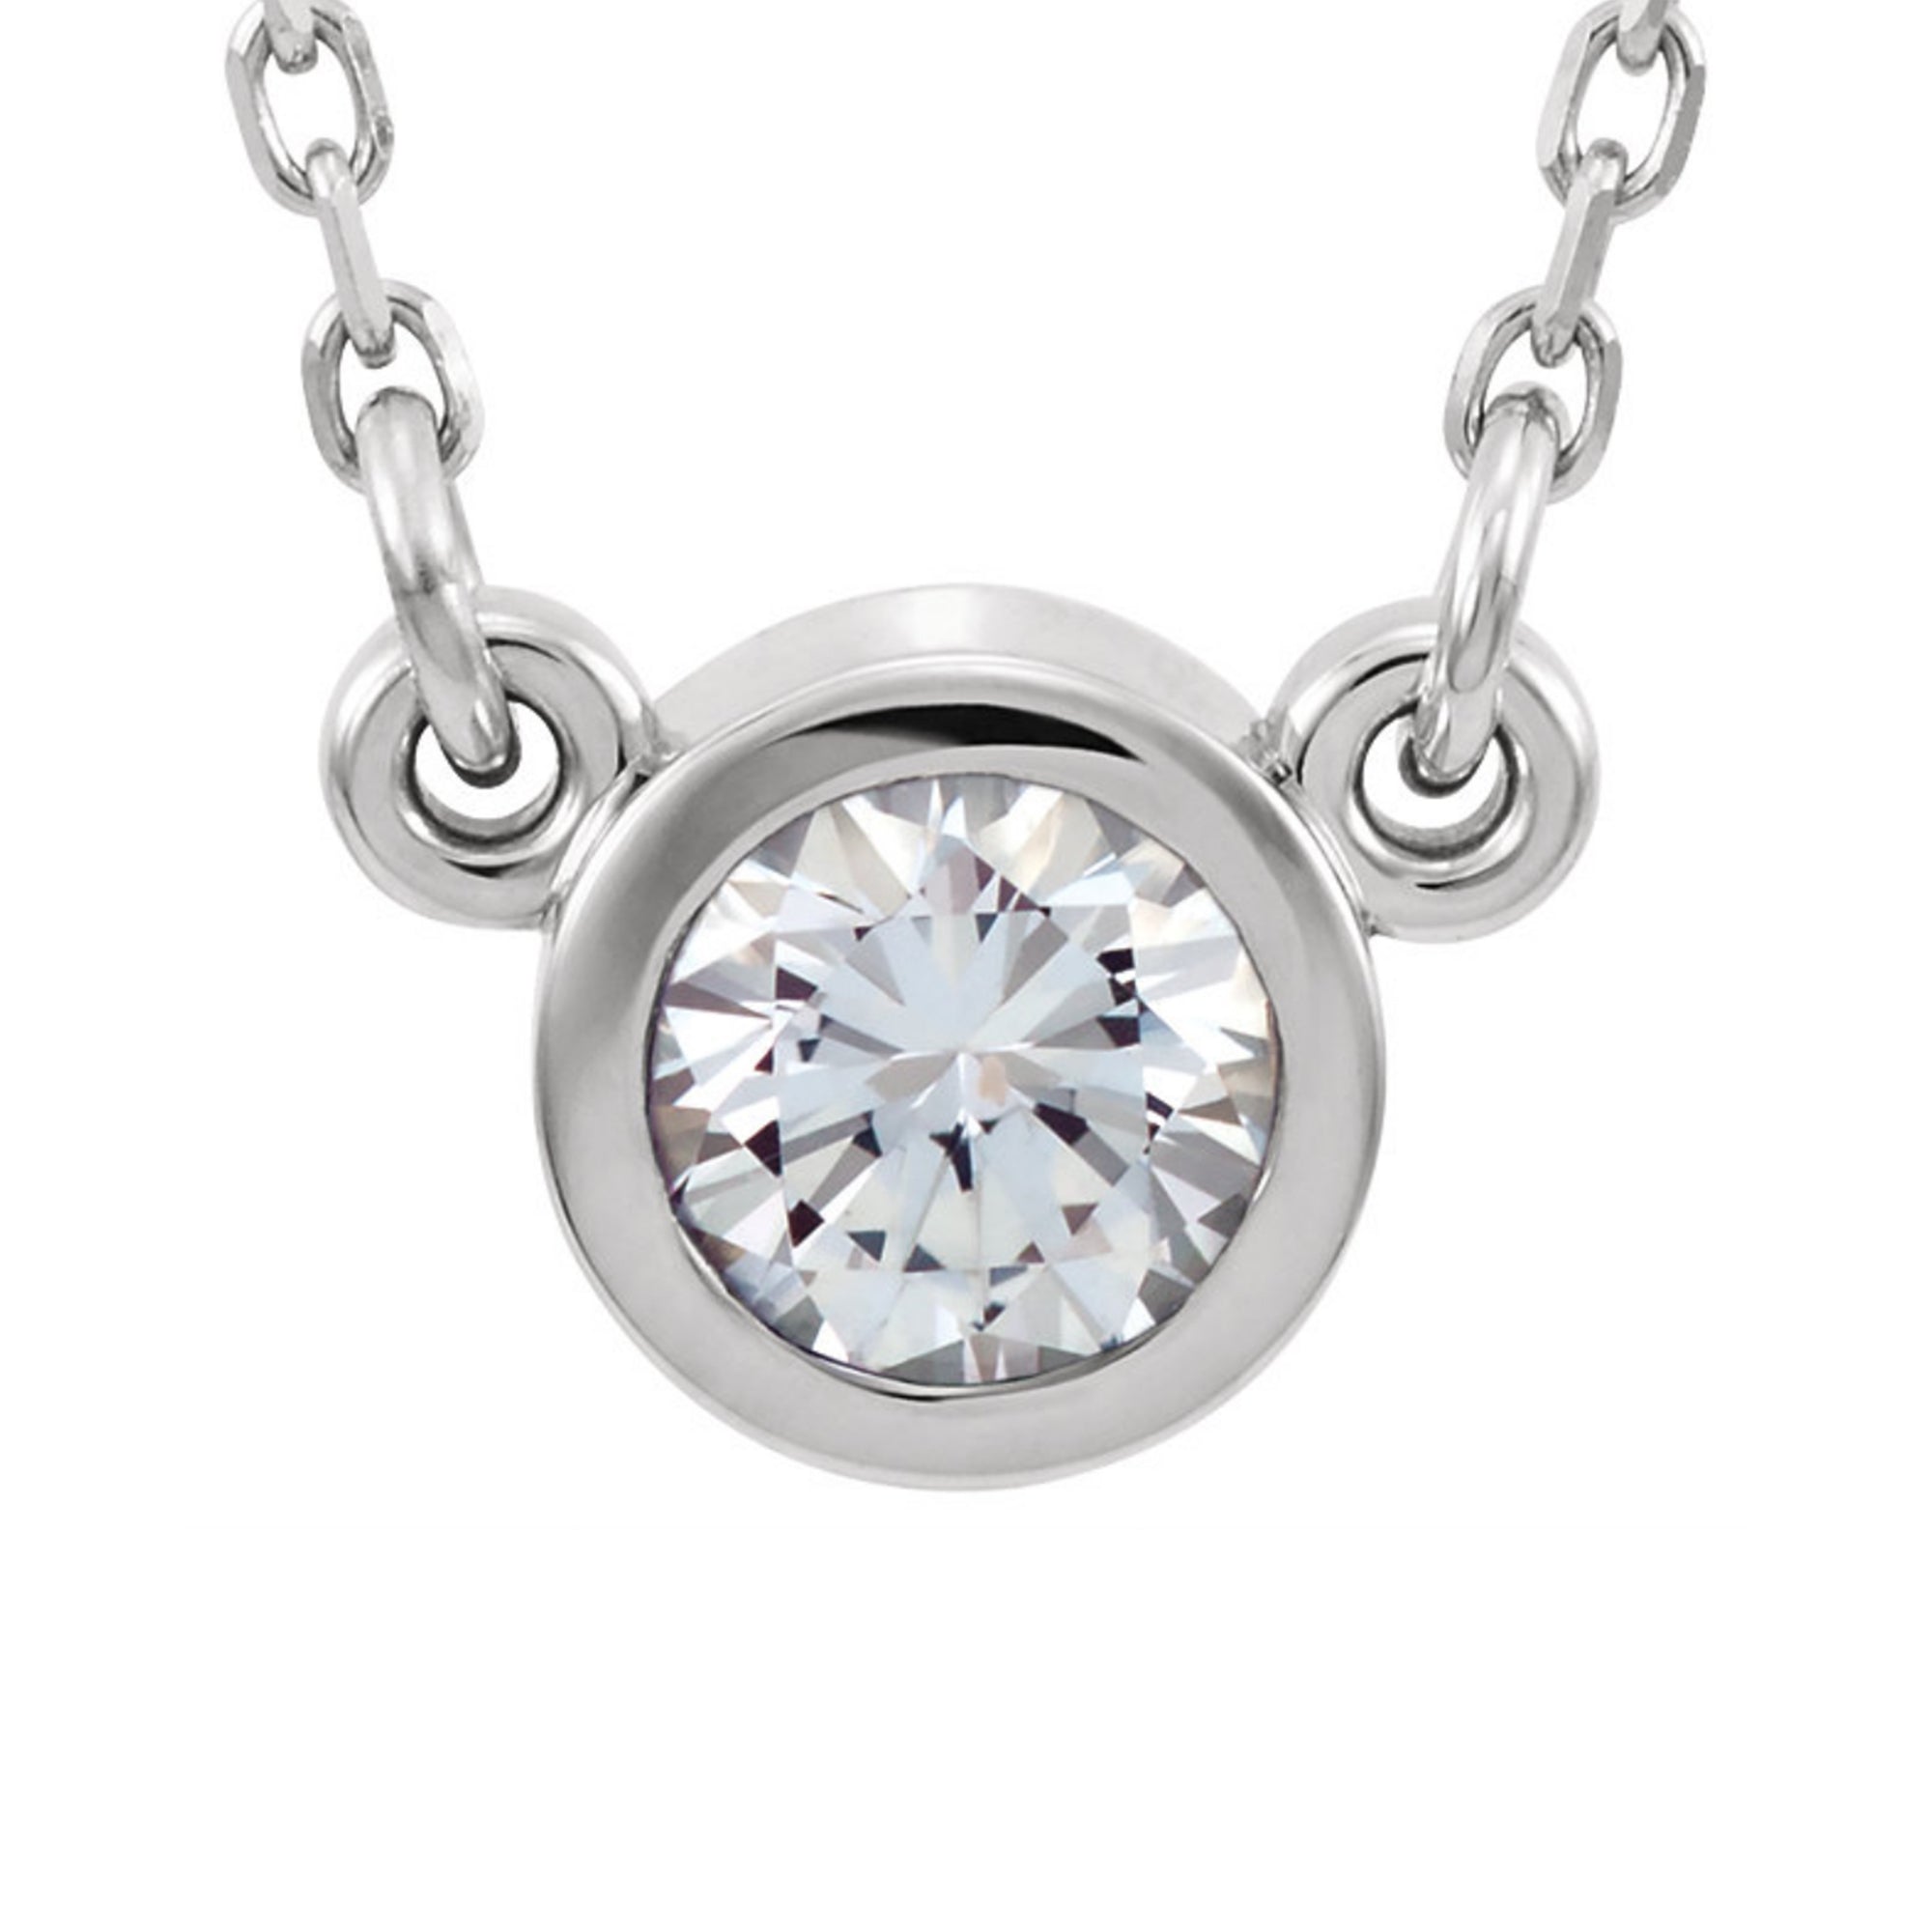 Genuine Gemstone Bezel-Set  Necklace in White, Yellow or Rose Gold - Talisman Collection Fine Jewelers